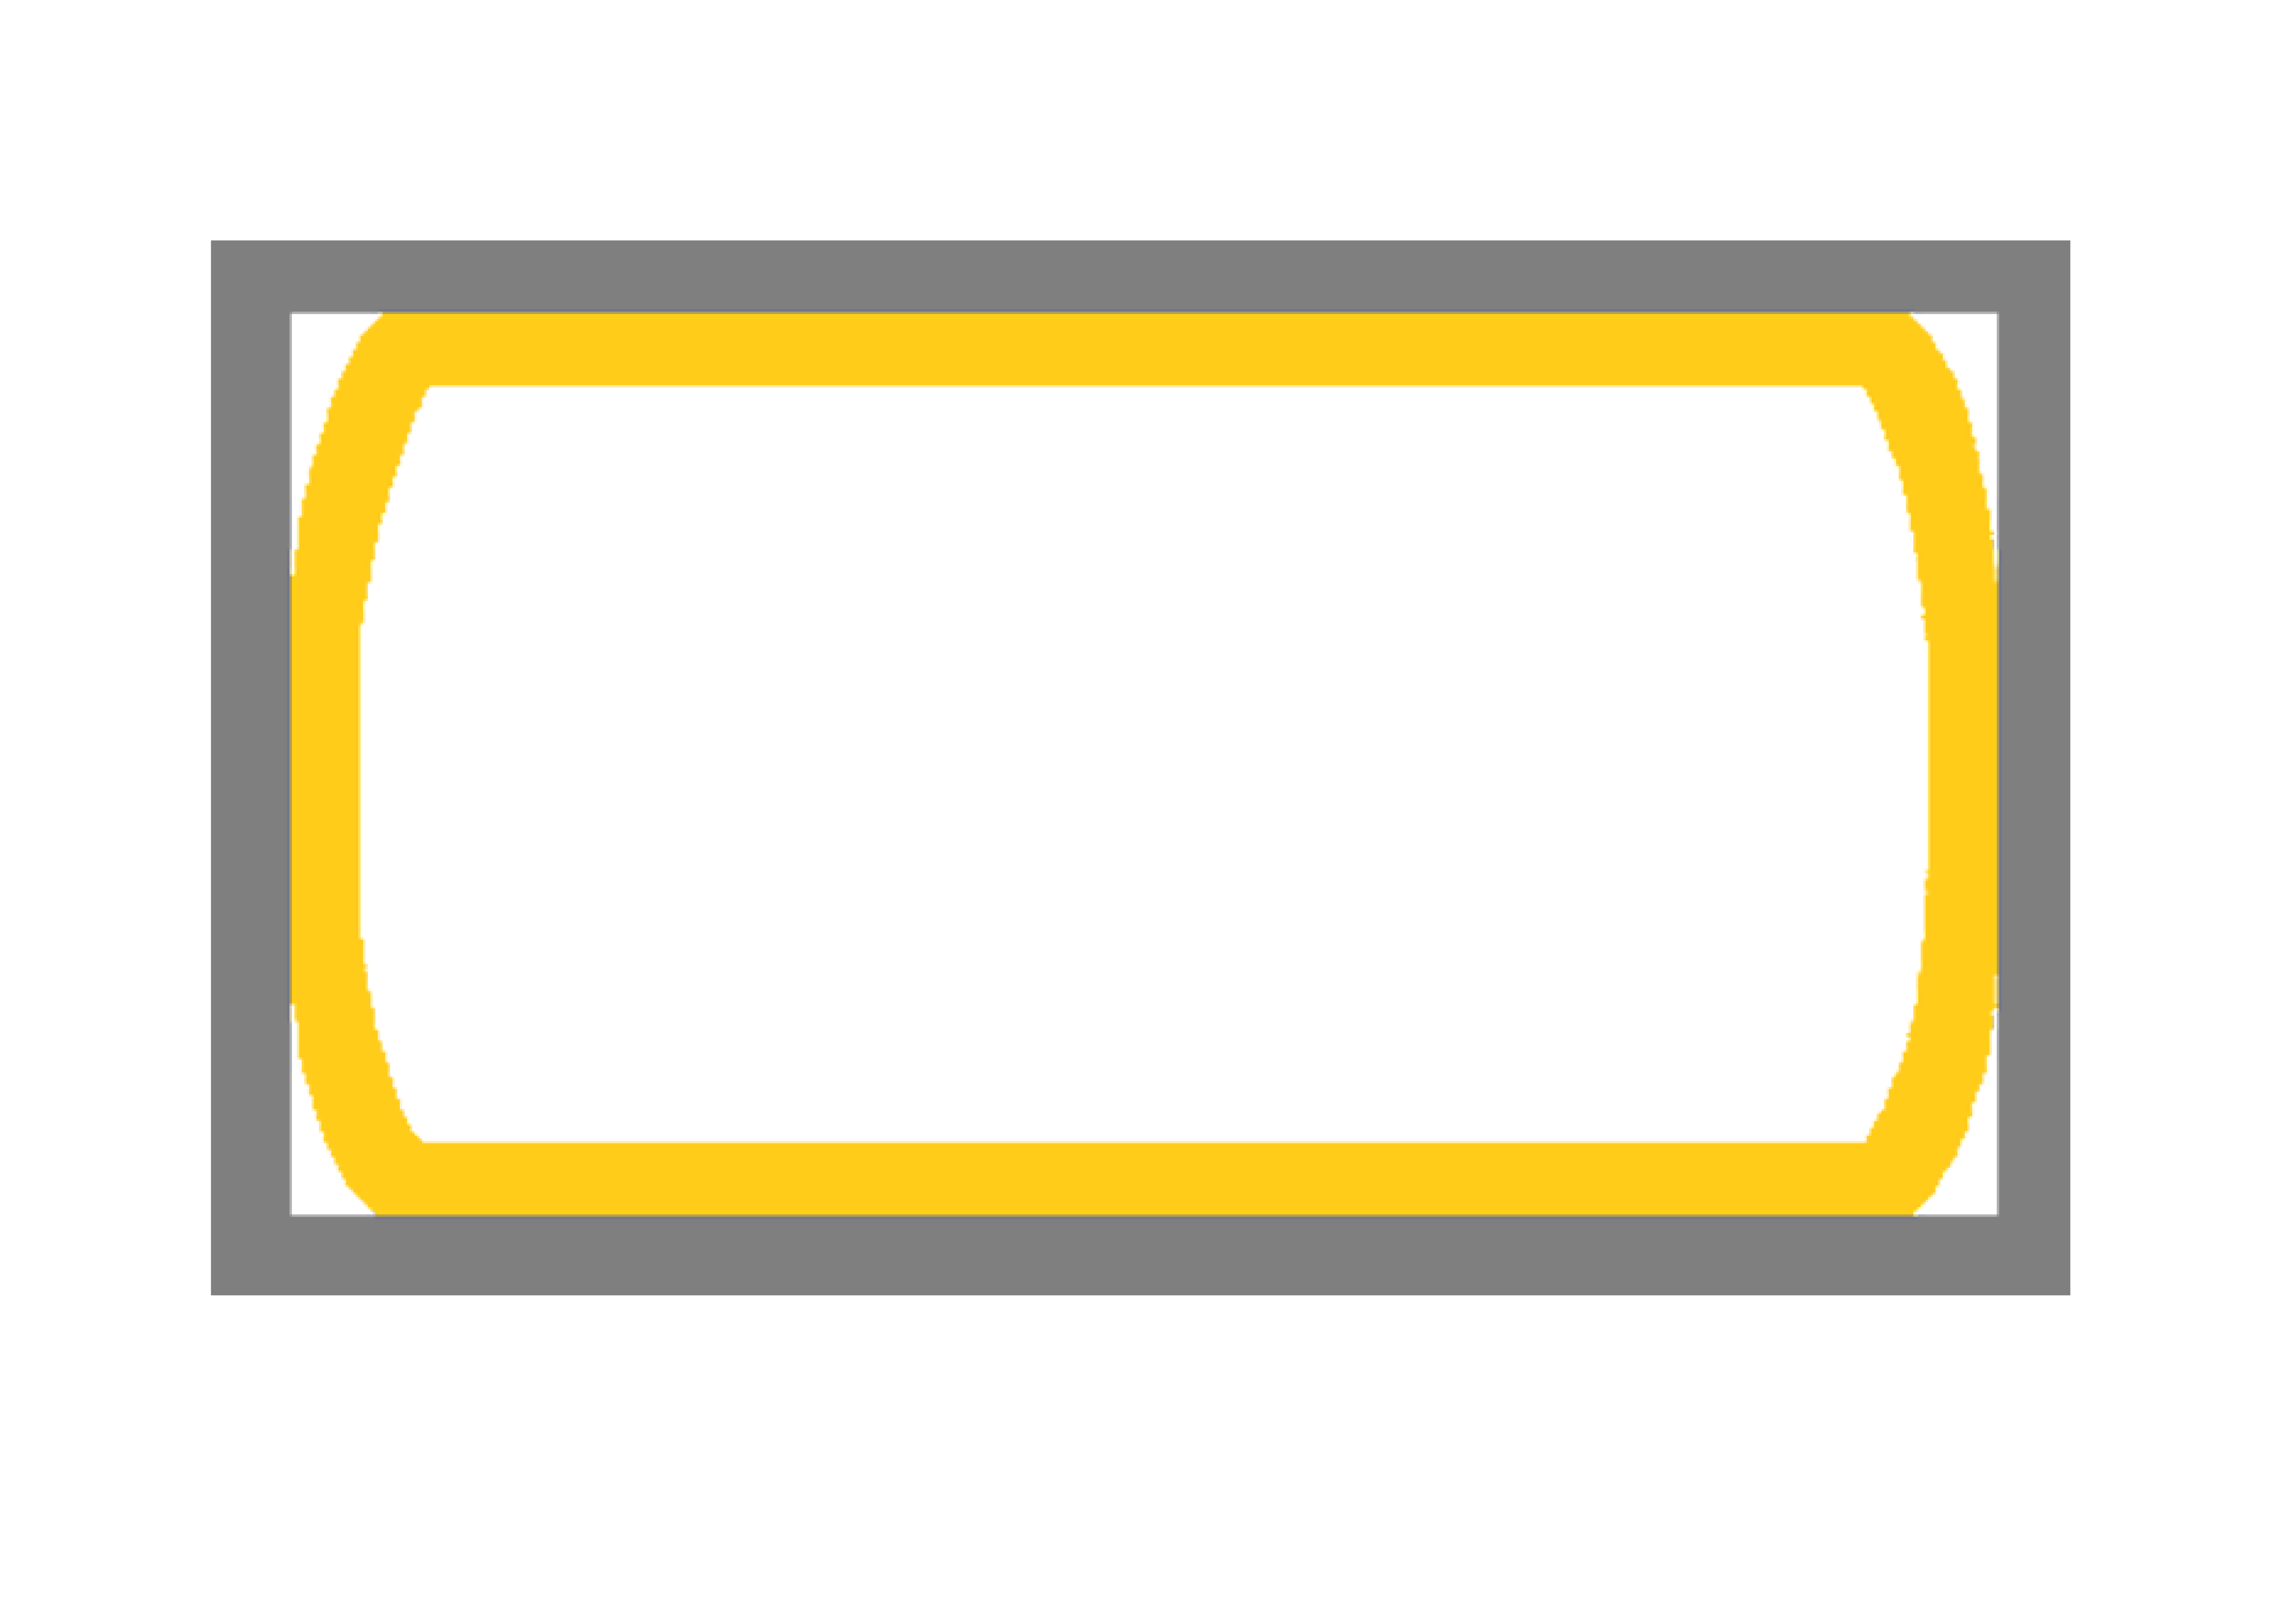 An Icon of a container with a yellow wall.